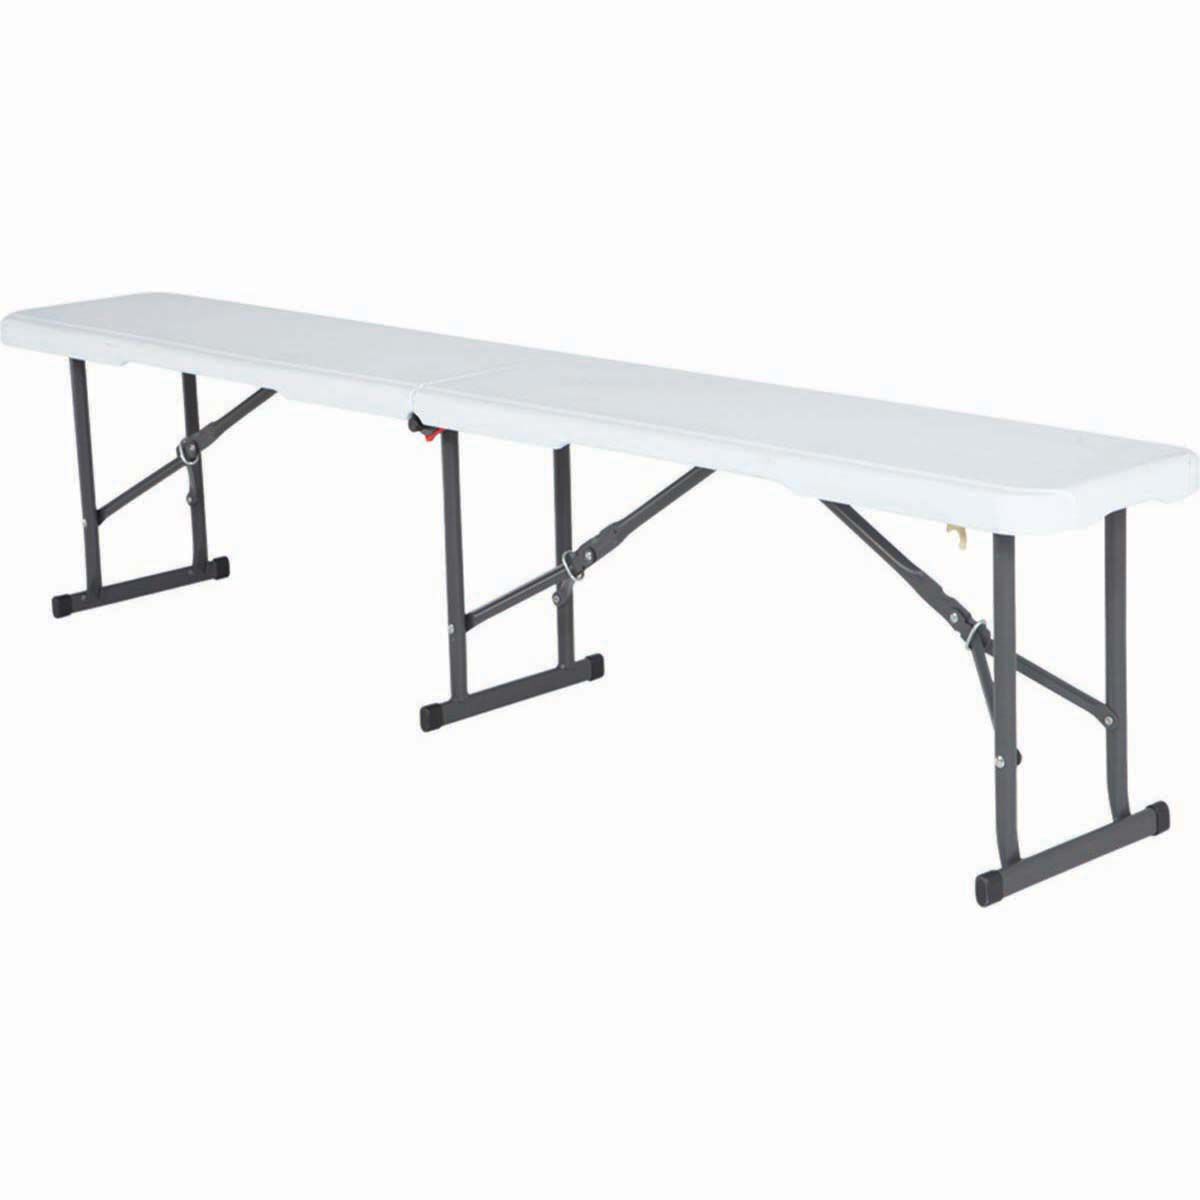 Detail Bunnings Foldable Table Nomer 17